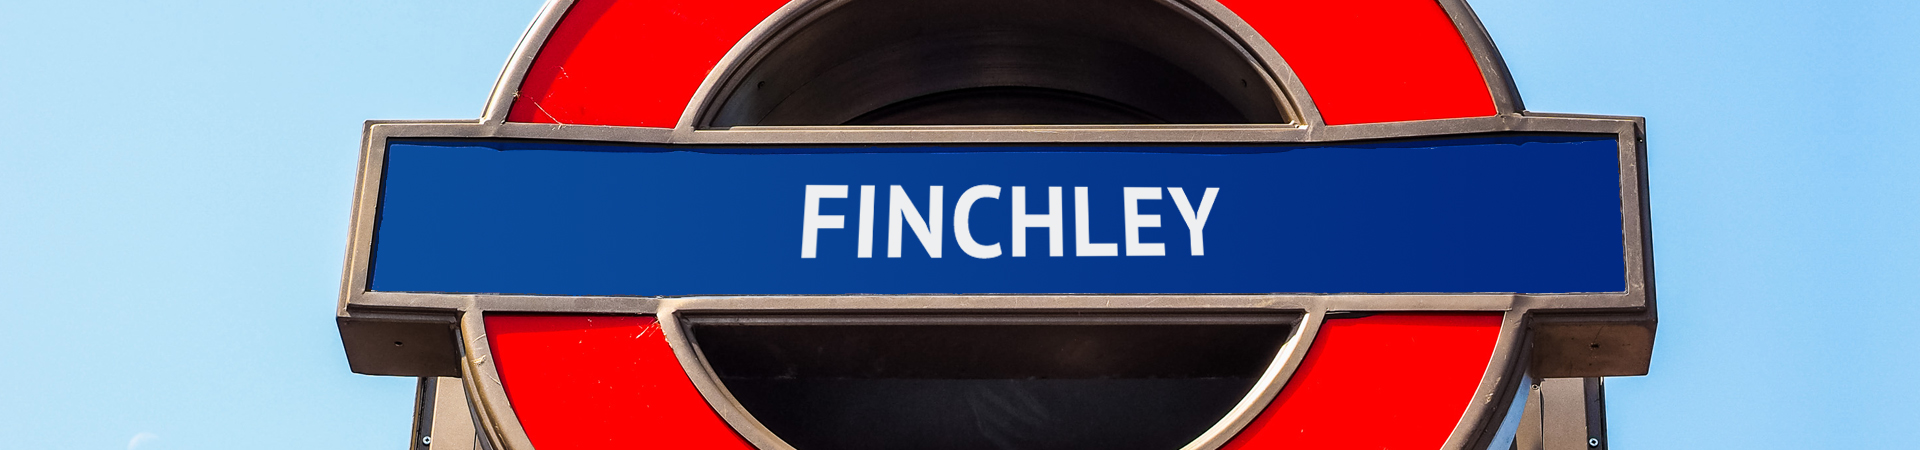 finchley landscaping services